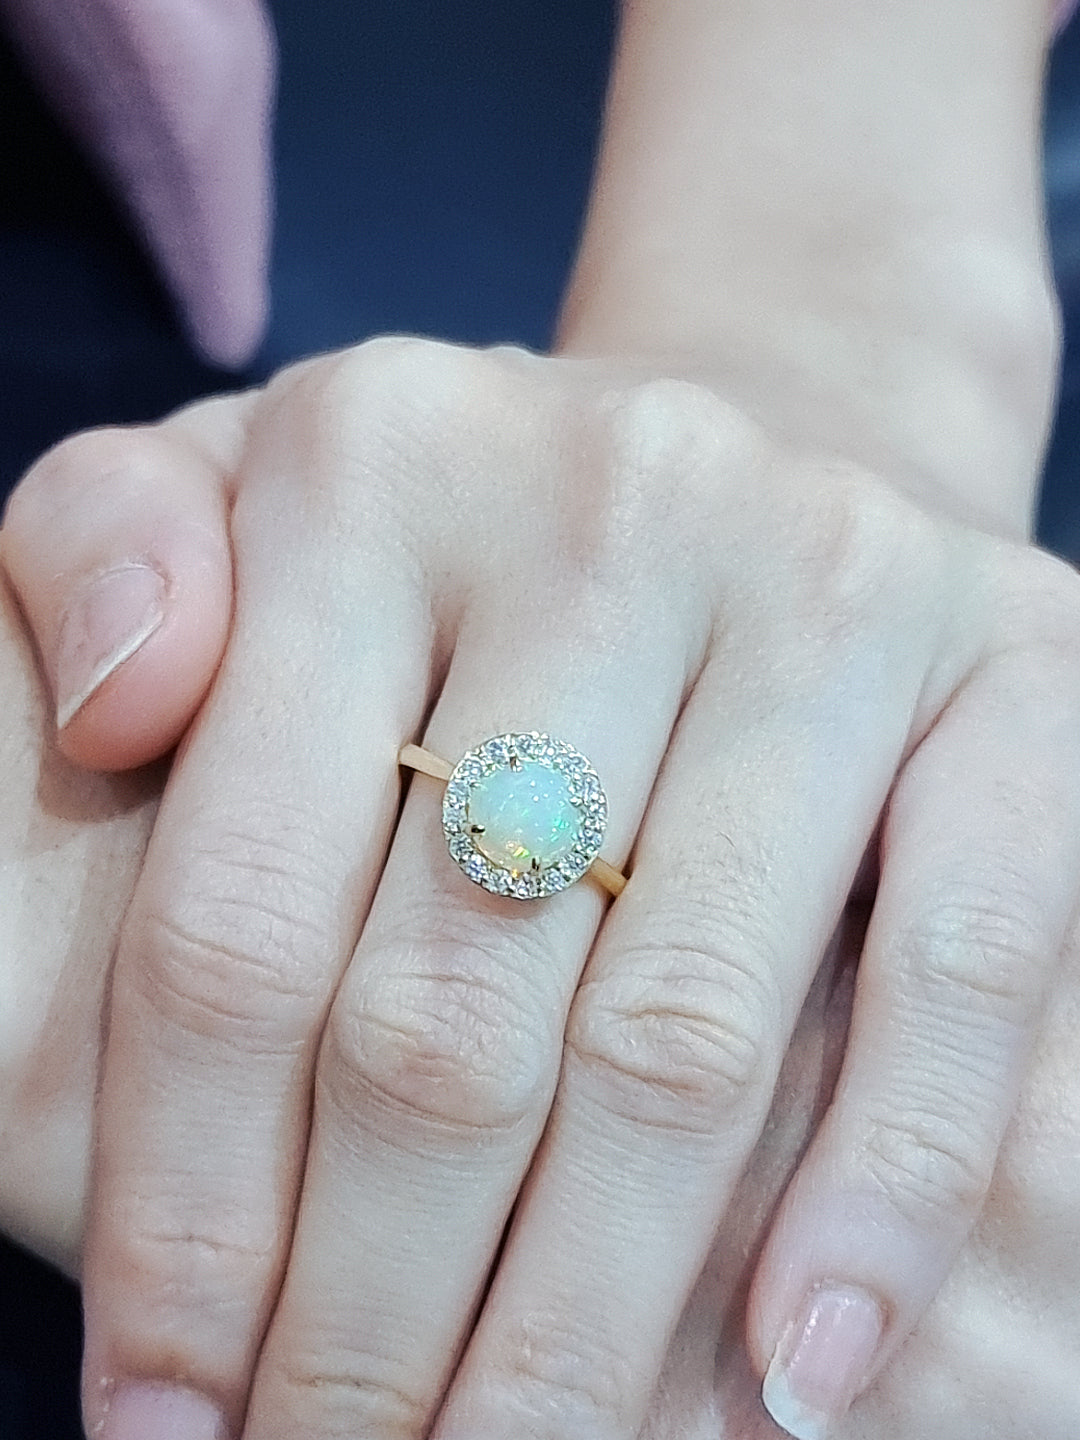 Round Opal And Diamond Halo Ring In 18k Yellow Gold.